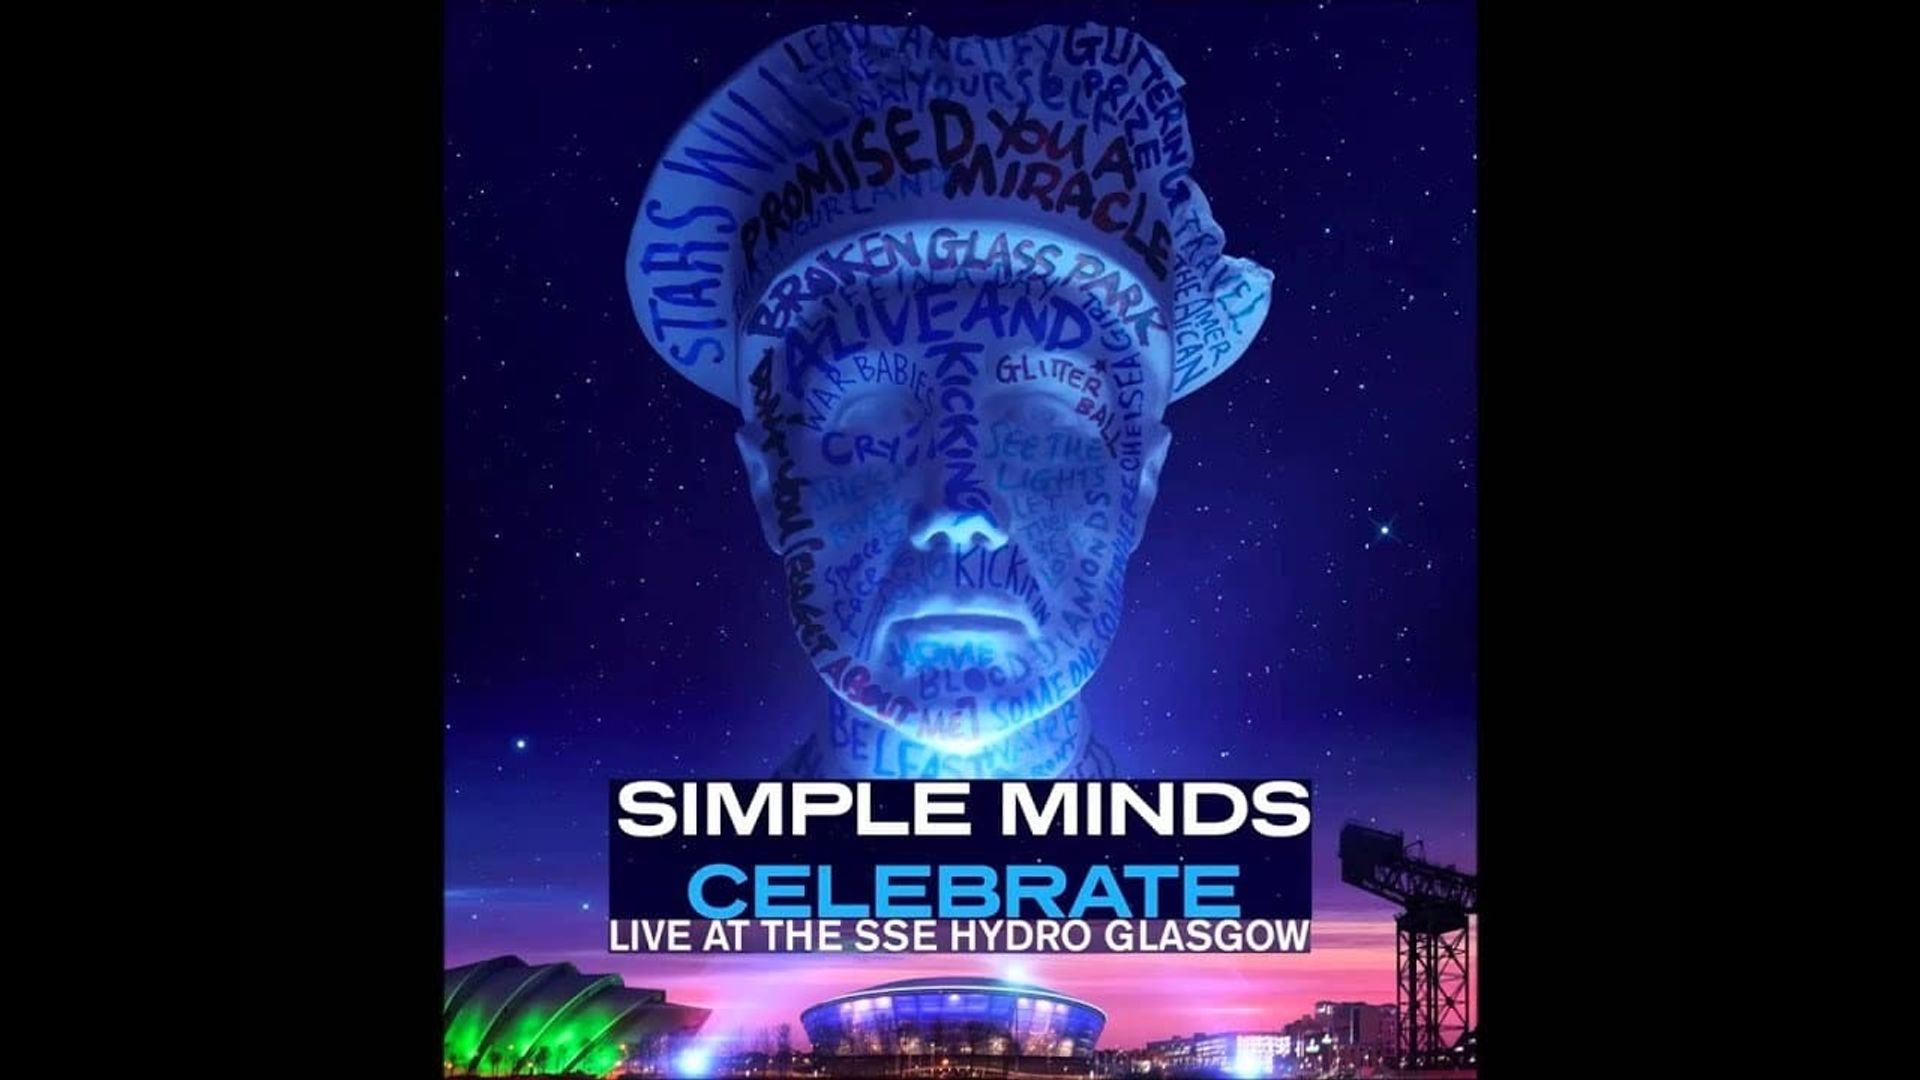 Simple Minds - Celebrate (Live at the SSE Hydro Glasgow) background